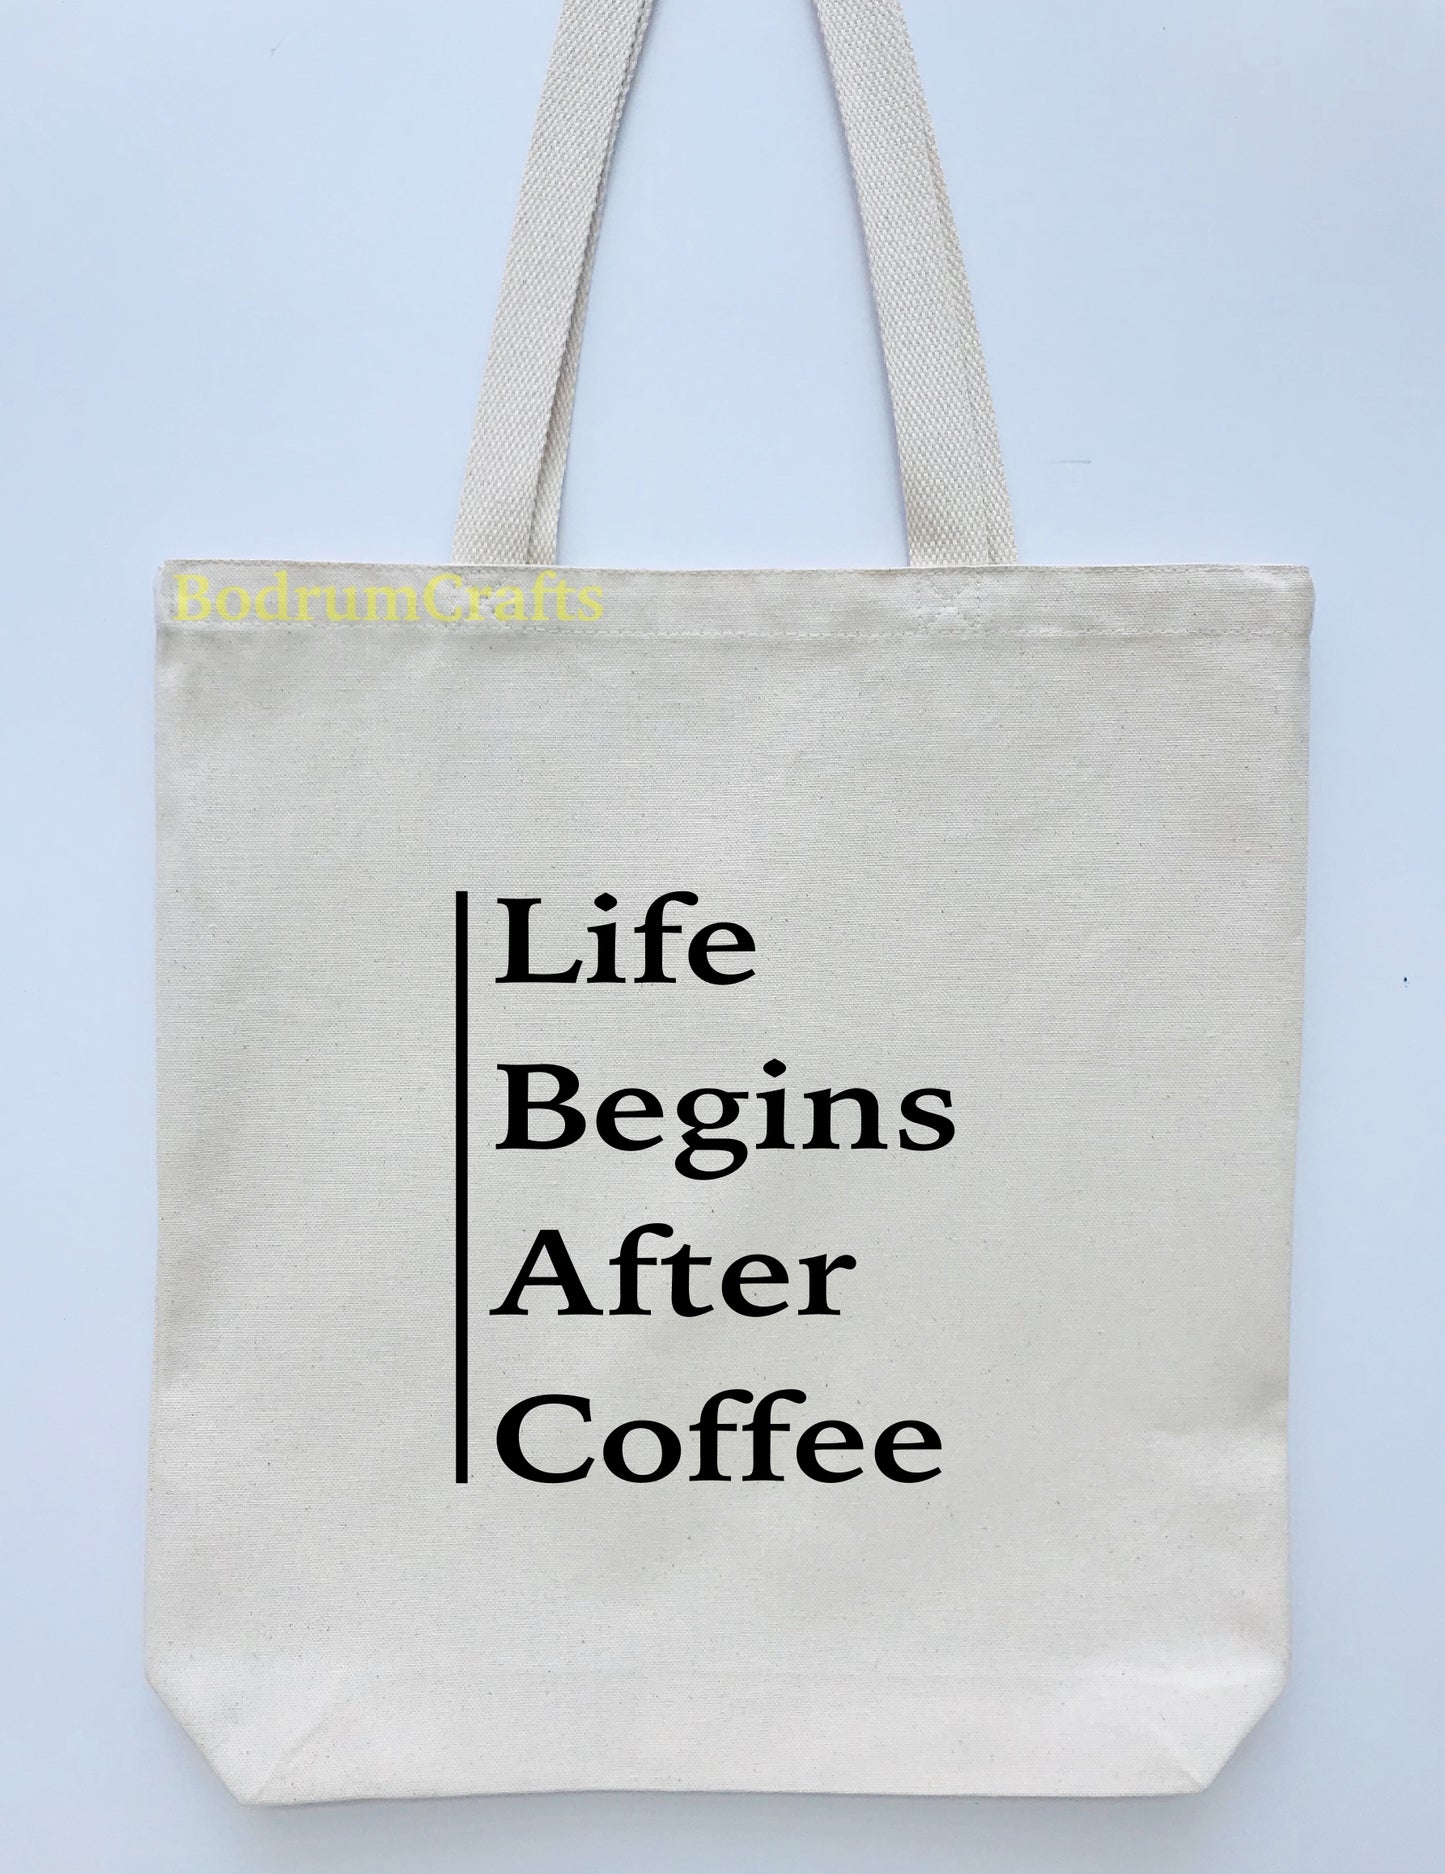 Wholesale Coffee Design Printed Canvas Tote Bag, "Life Begins After Coffee"